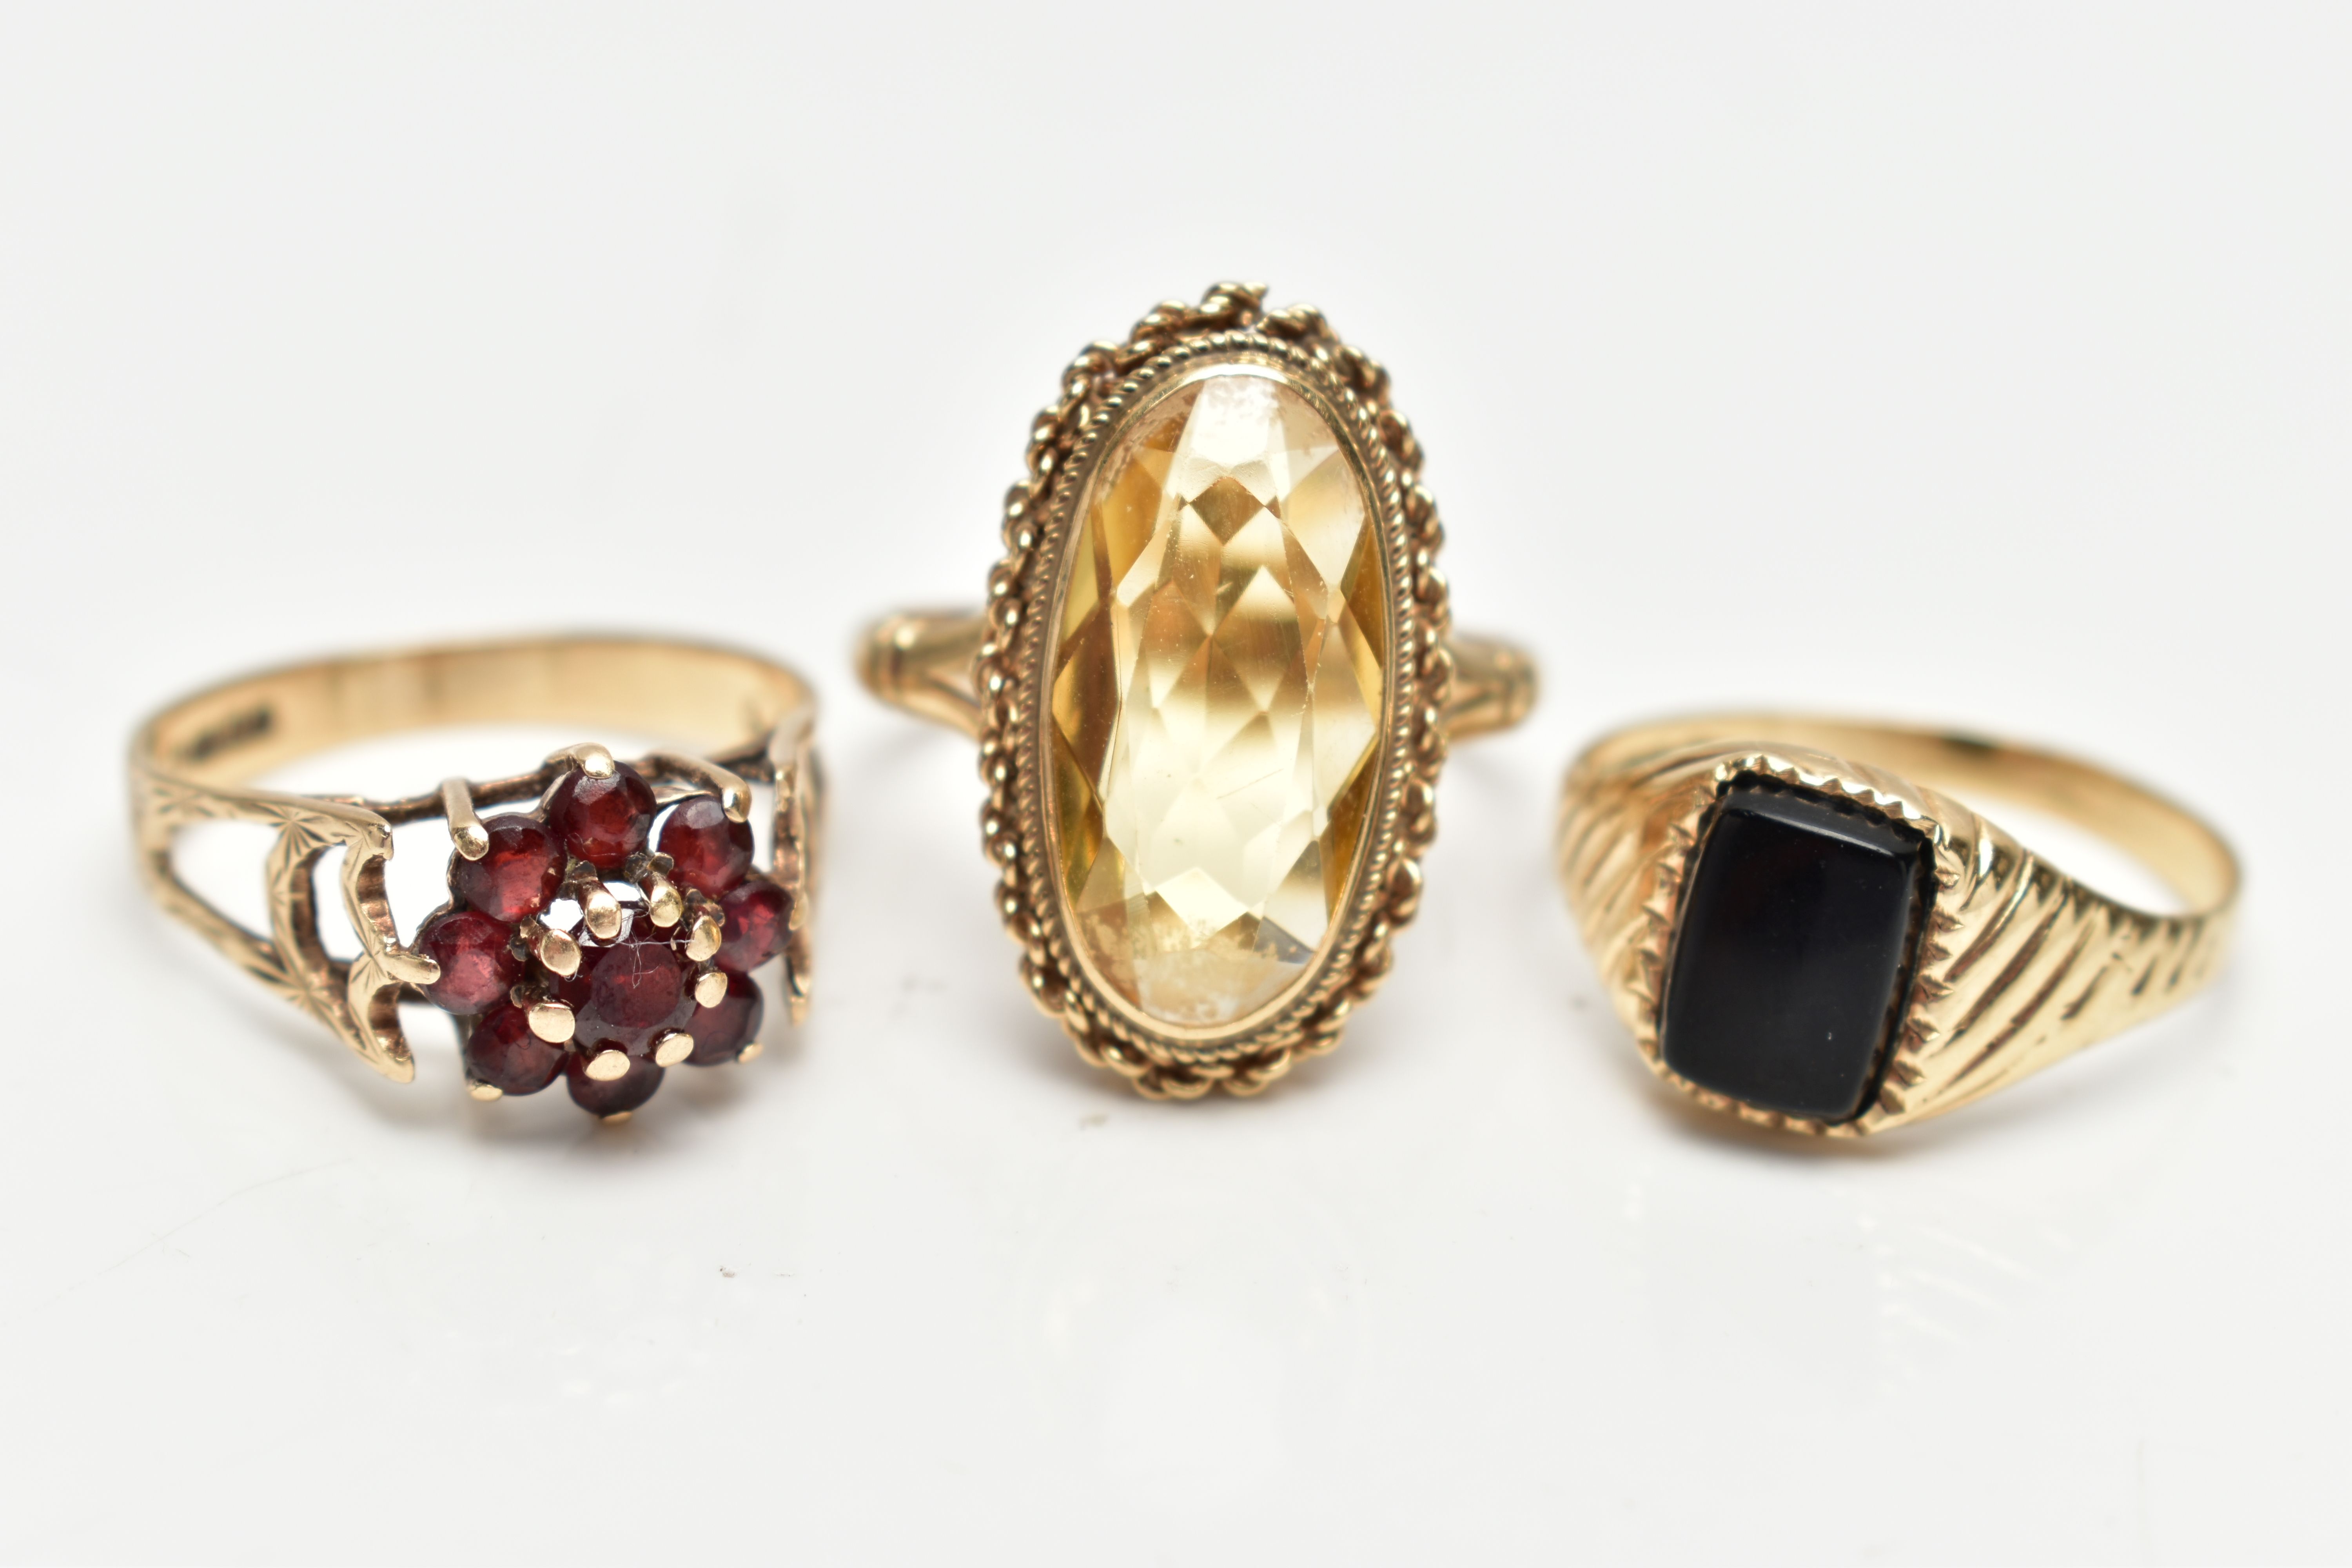 THREE 9CT GOLD RINGS, the first a yellow gold signet ring, set with a rectangular cut onyx stone,